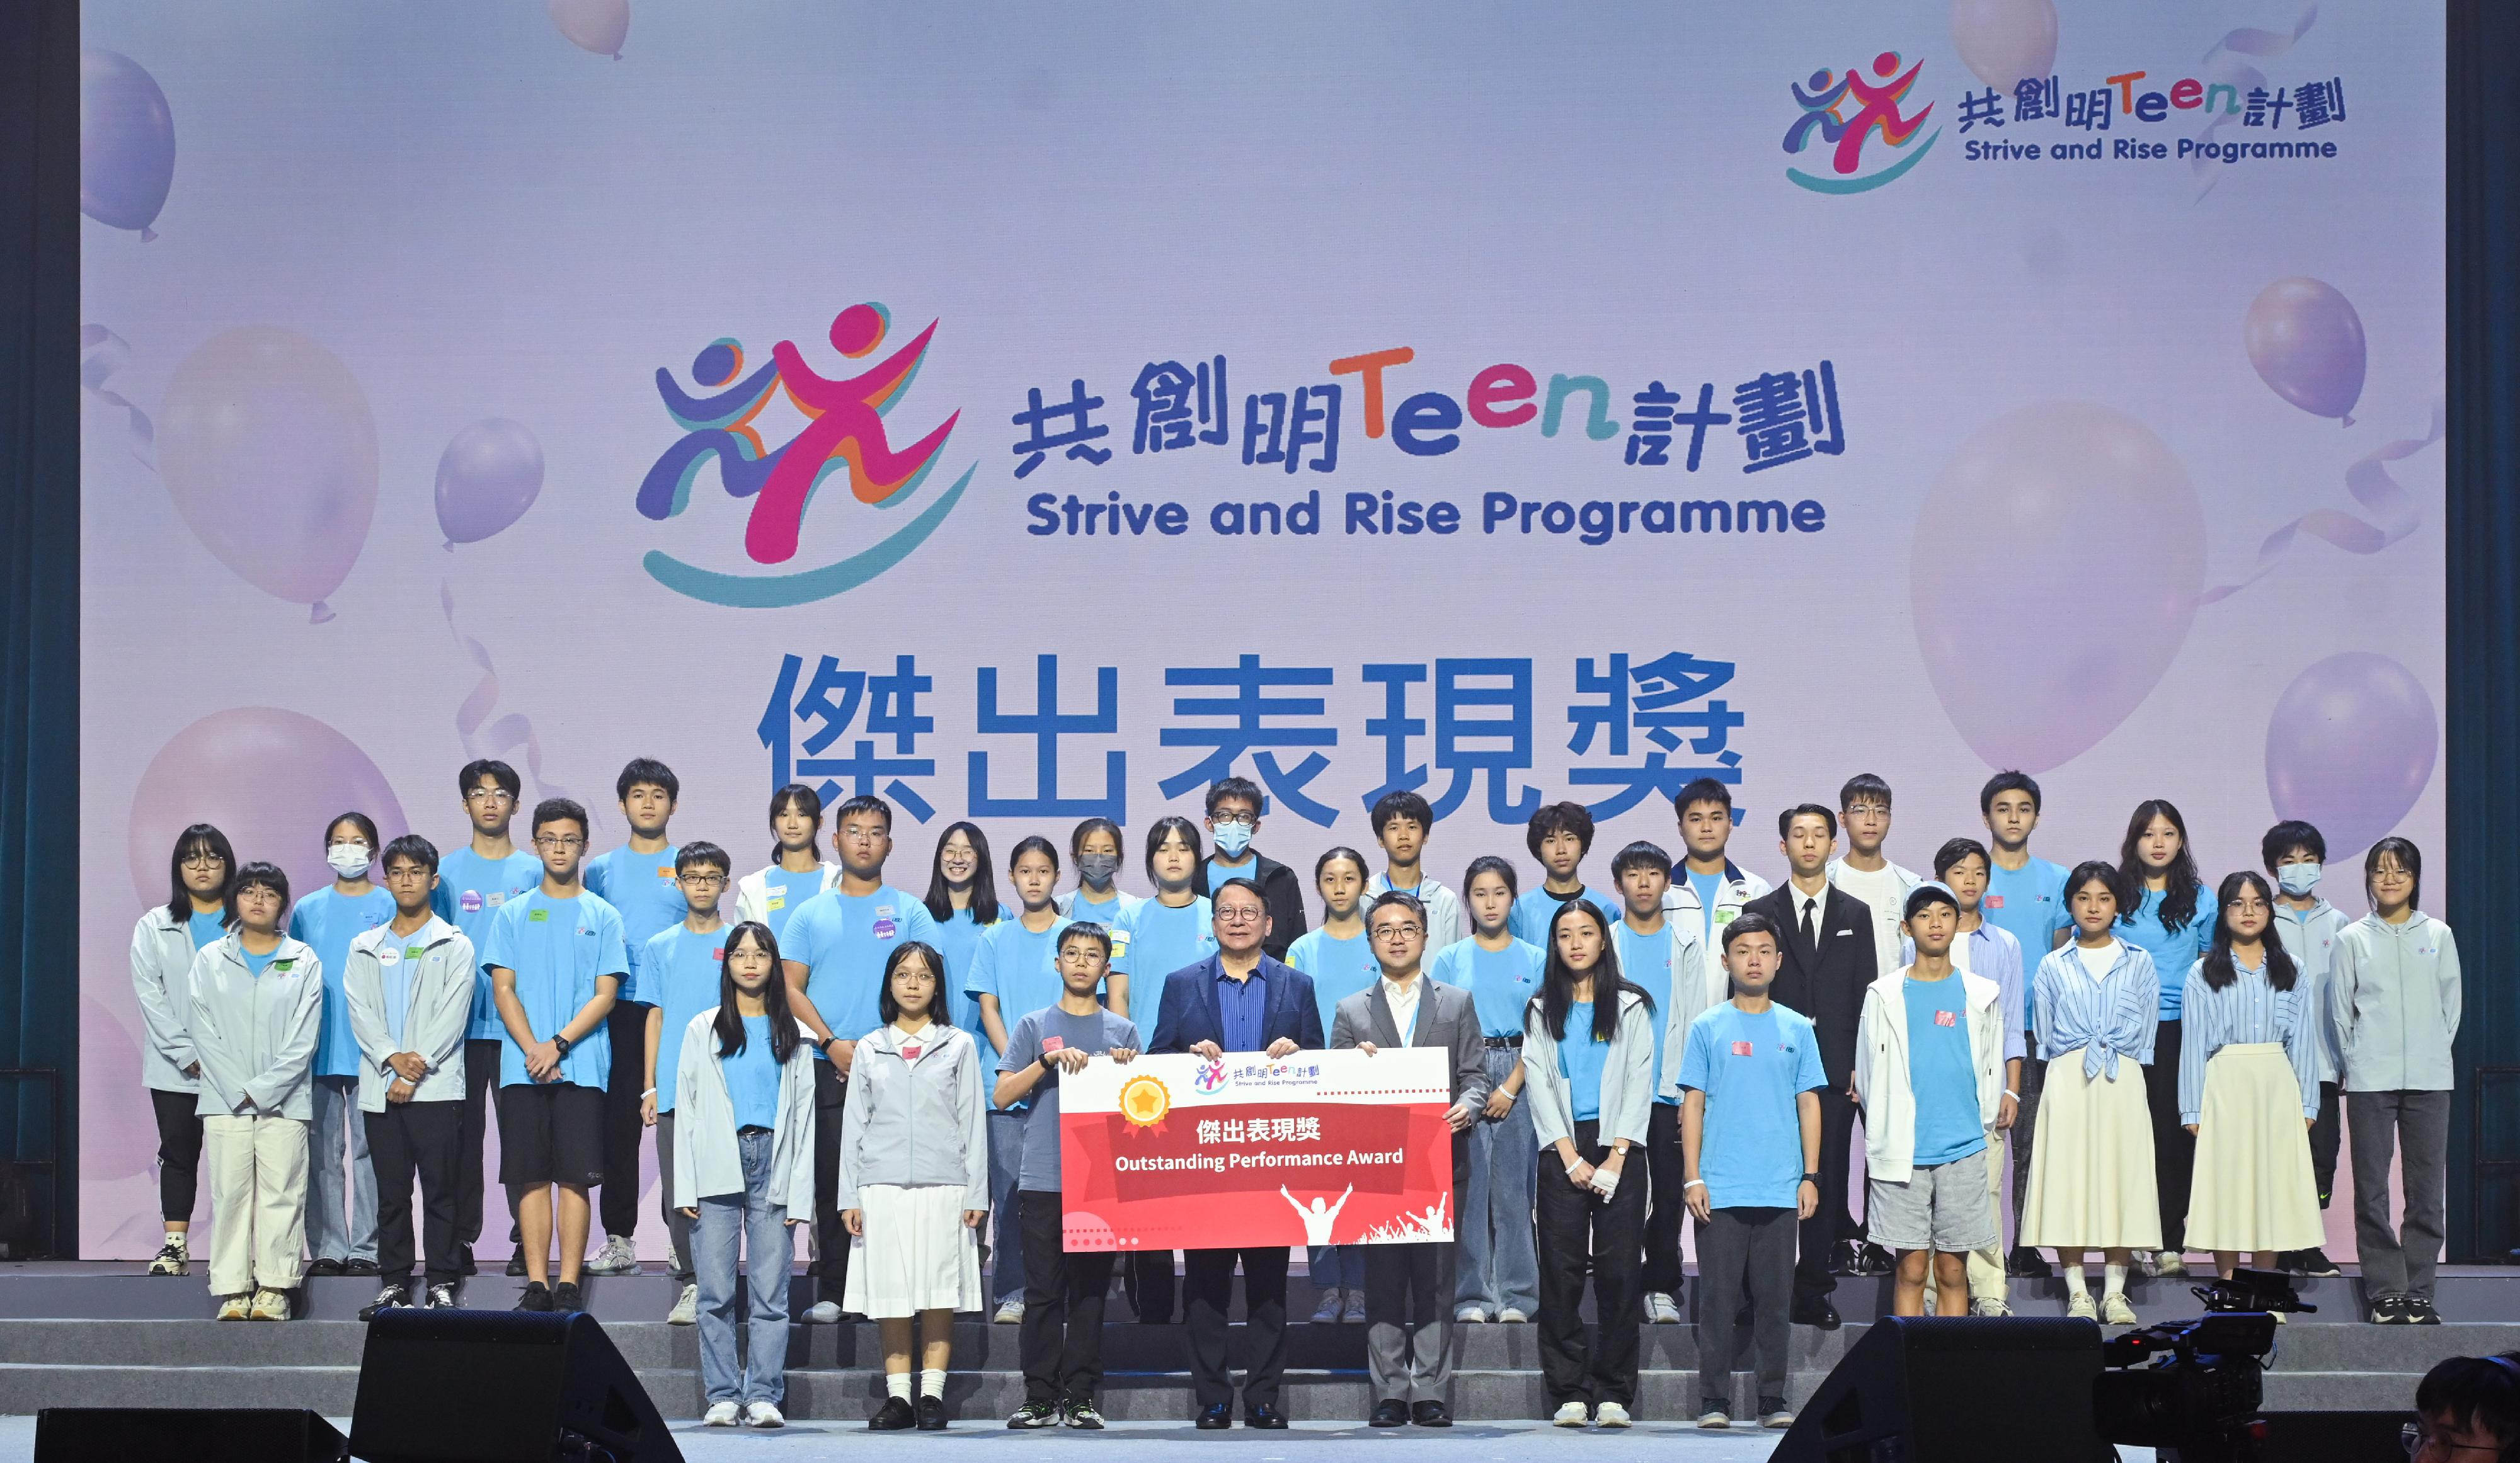 The Chief Secretary for Administration, Mr Chan Kwok-ki, attended the Graduation Ceremony of the Strive and Rise Programme today (November 4). Photo shows Mr Chan (front row, fourth left) and the Acting Secretary for Education, Mr Sze Chun-fai (front row, fourth right), with awarded mentees.
